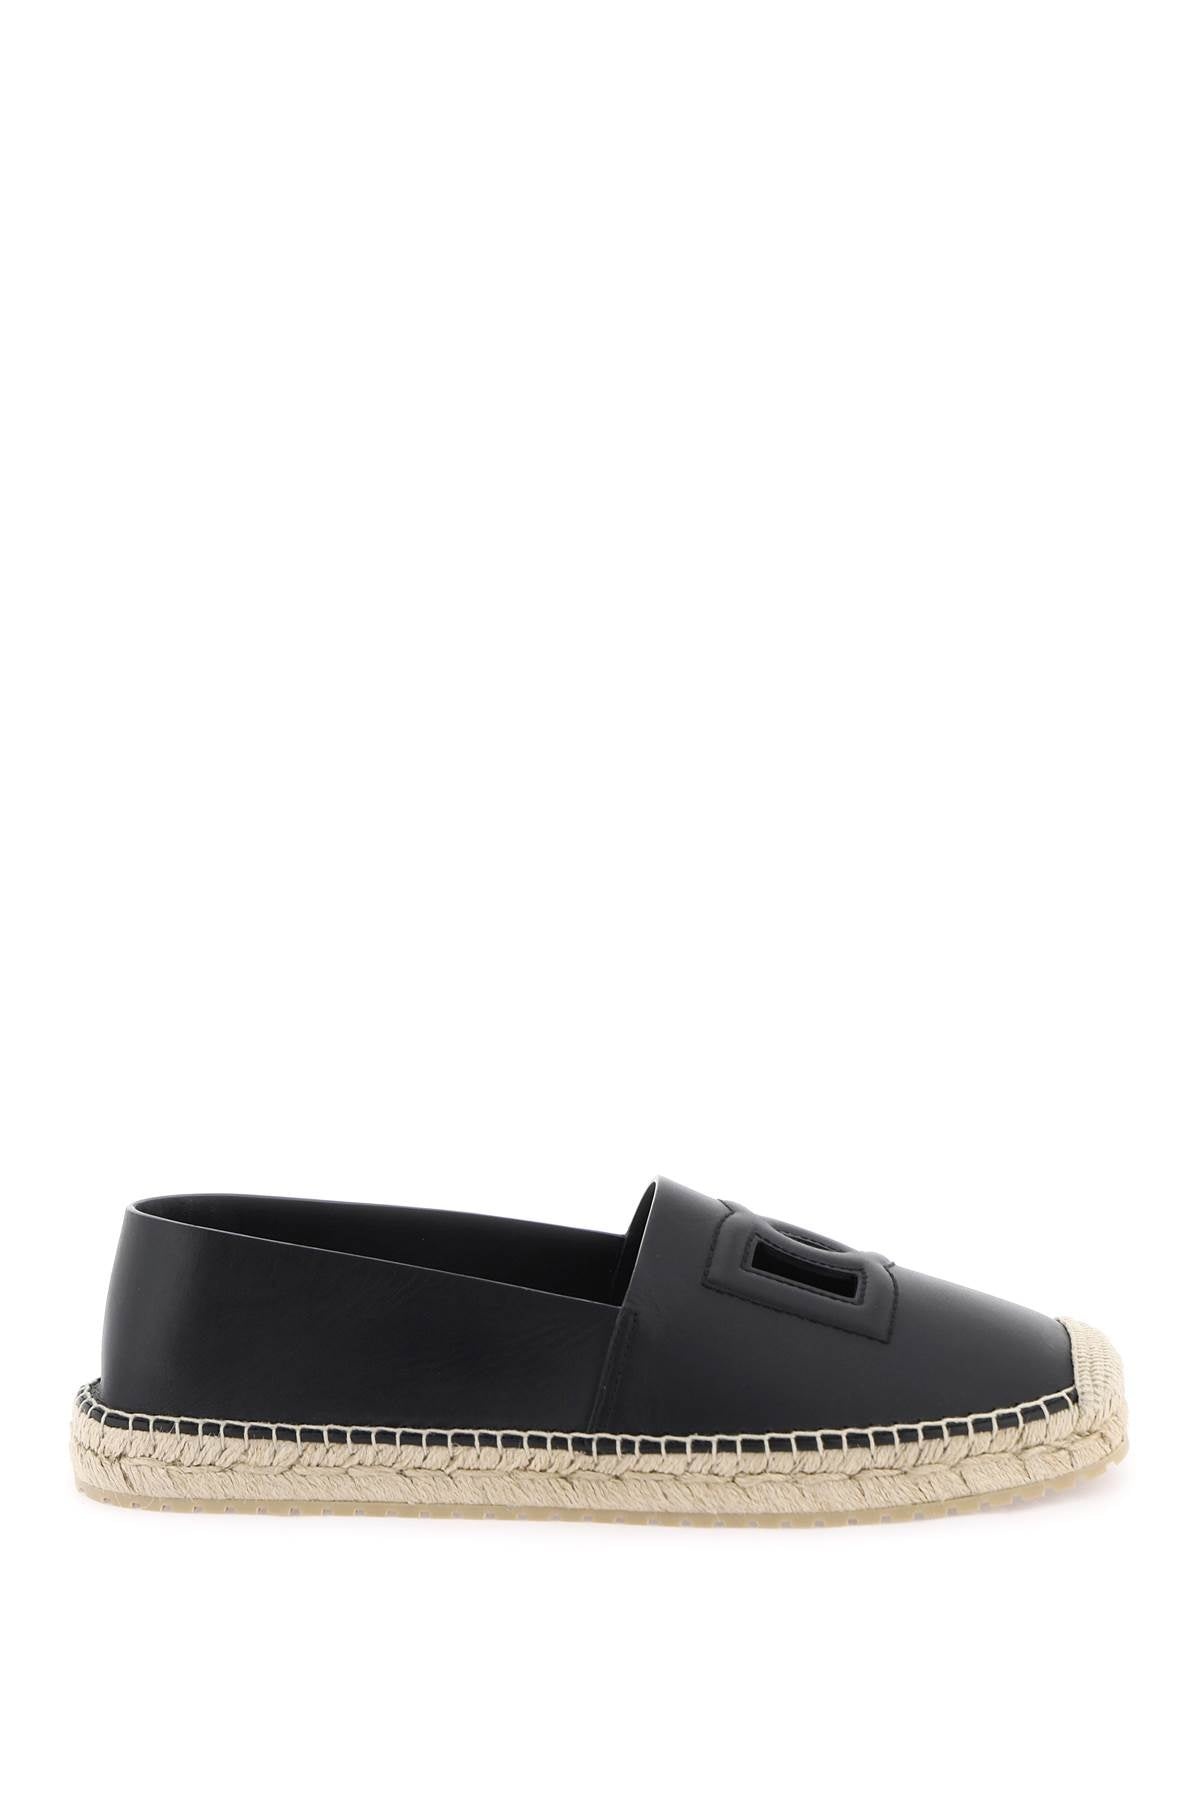 Dolce & Gabbana Leather Espadrilles With Dg Logo And Men - 1